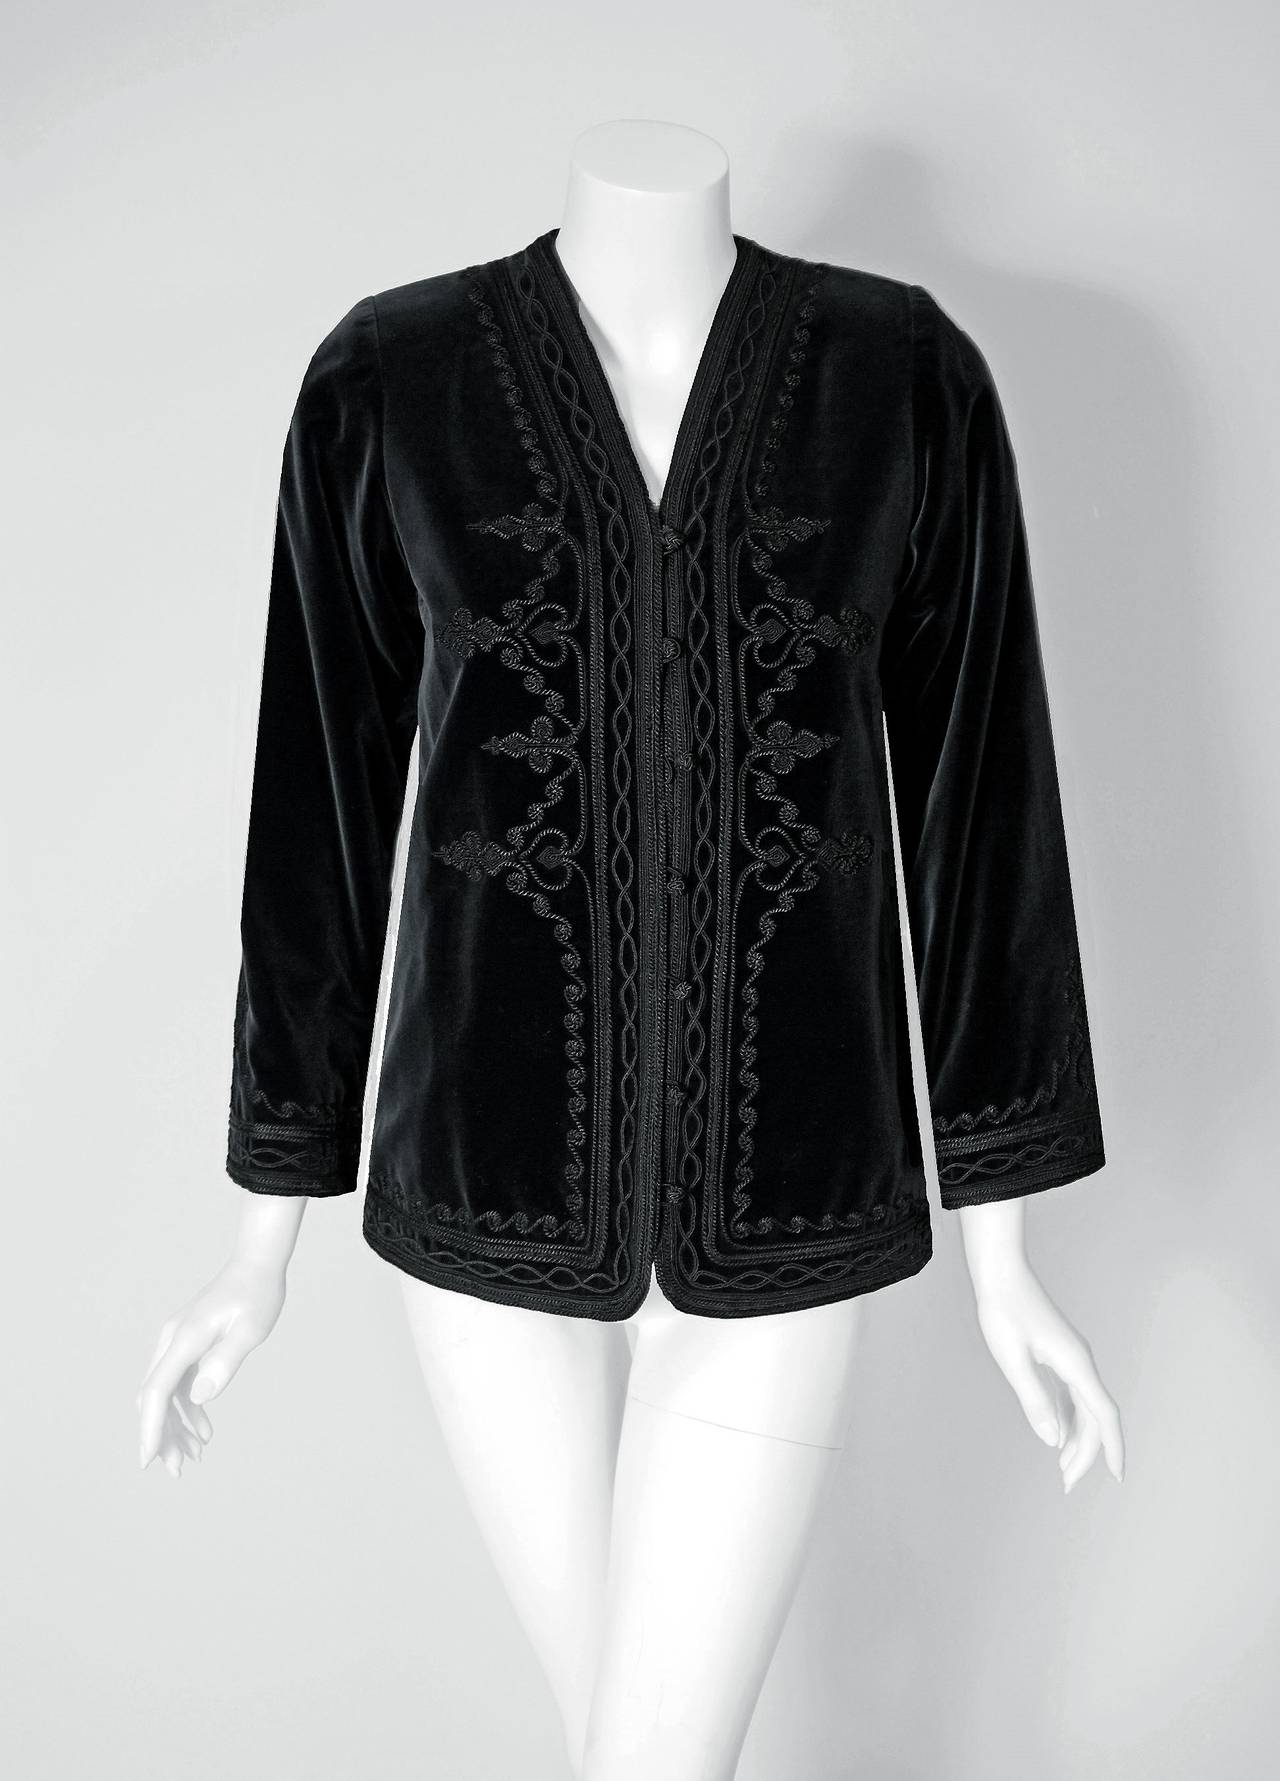 This exquisite Yves Saint Laurent embroidered jacket and skirt ensemble is from the infamous Rive Gauche Russian collection of 1976-1977. Pieces from this collection are very rare and are true examples of fashion history. I adore the unique bohemian